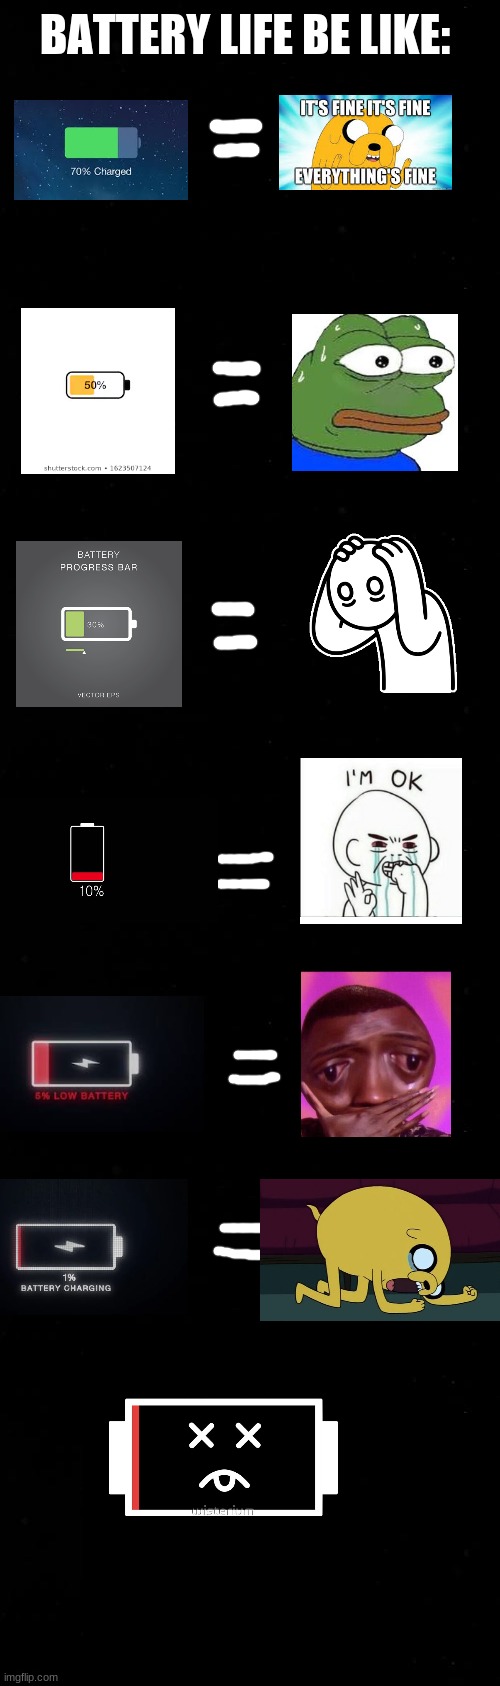 When you lose your charger | BATTERY LIFE BE LIKE: | image tagged in battery,funny meme,sad | made w/ Imgflip meme maker